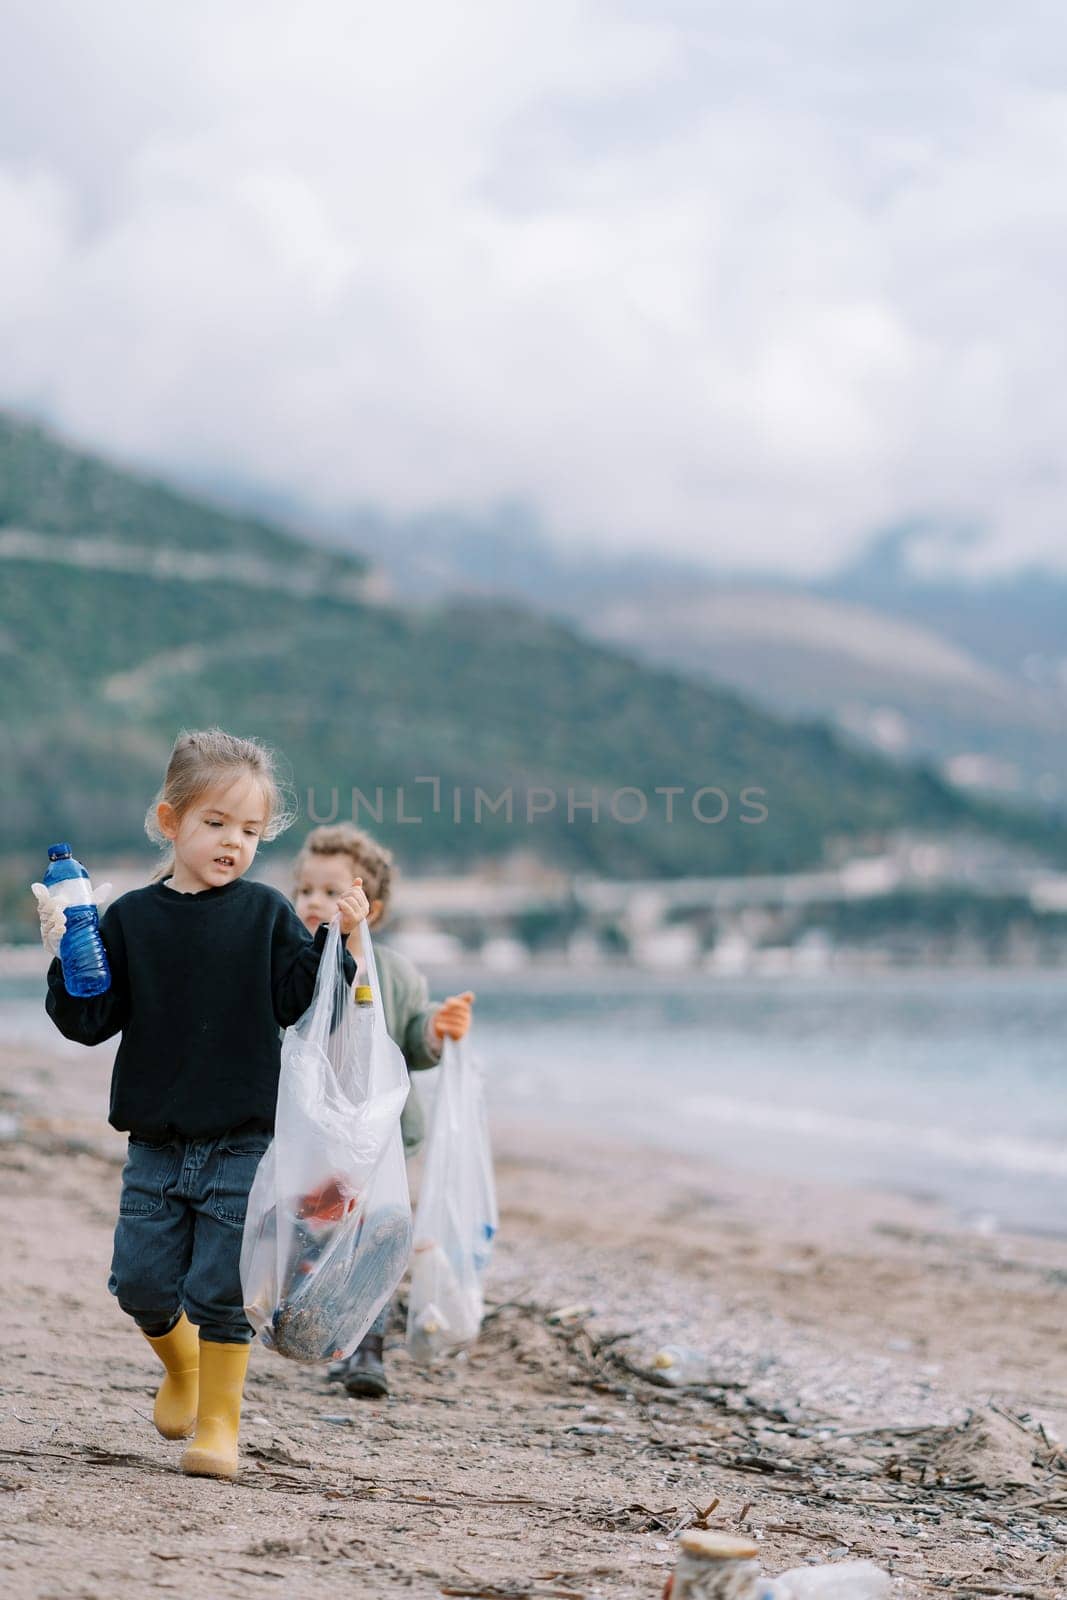 Little girls collect plastic bottles into bags on the sandy beach by Nadtochiy